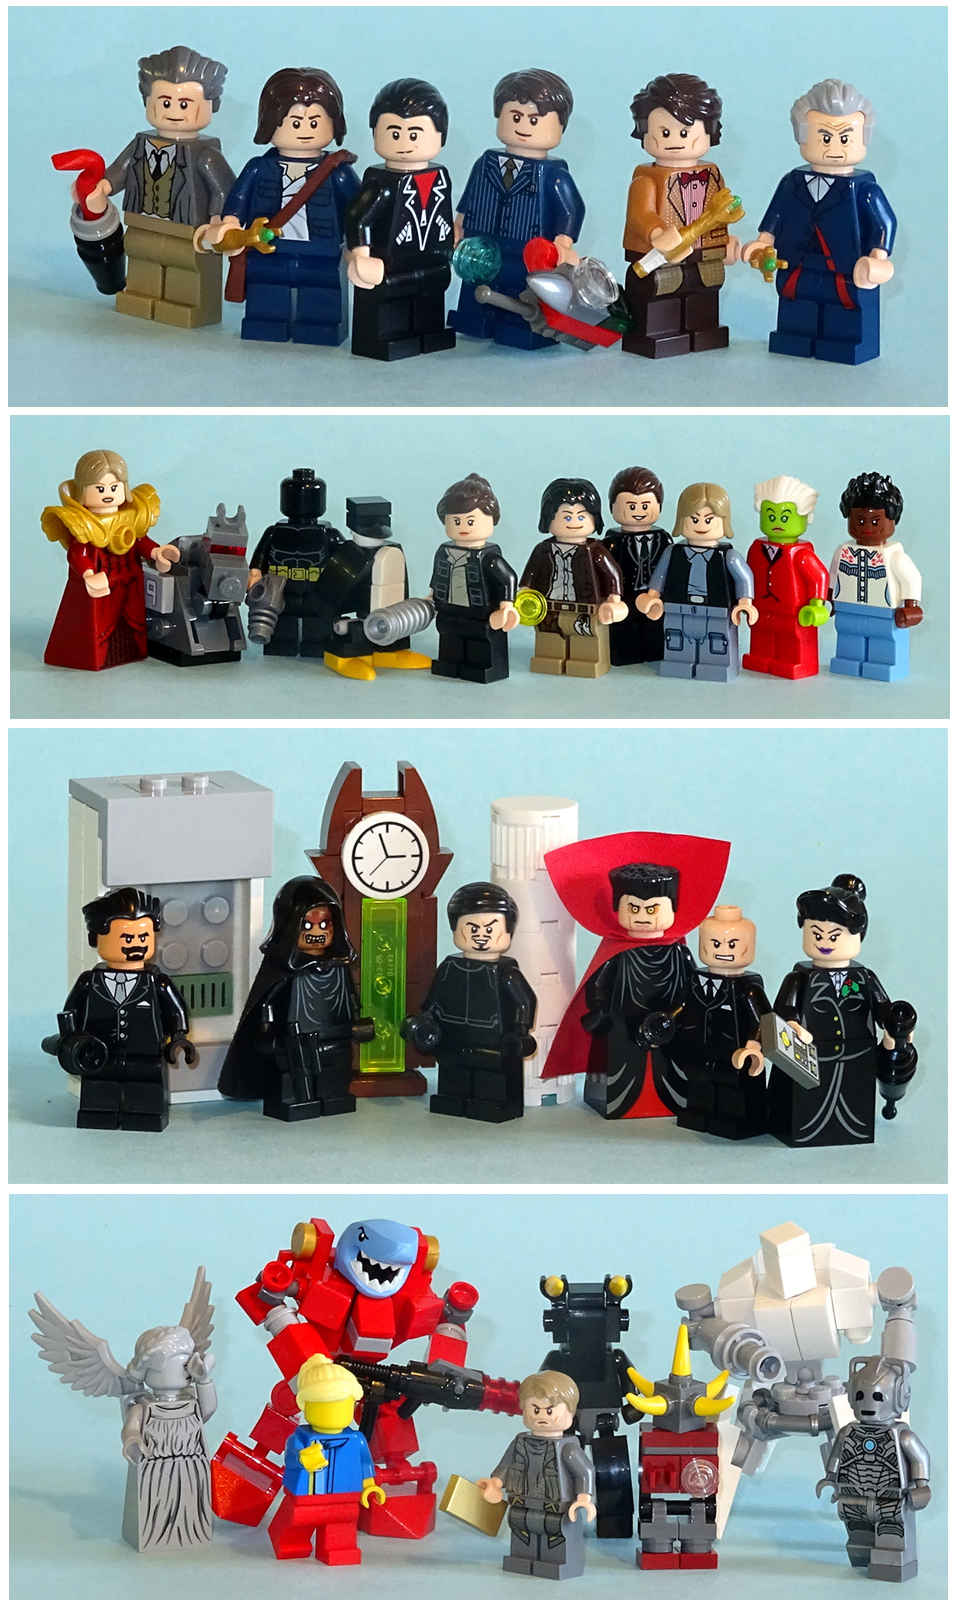 Lego Doctor Who Minifigs by Librarian-bot on DeviantArt